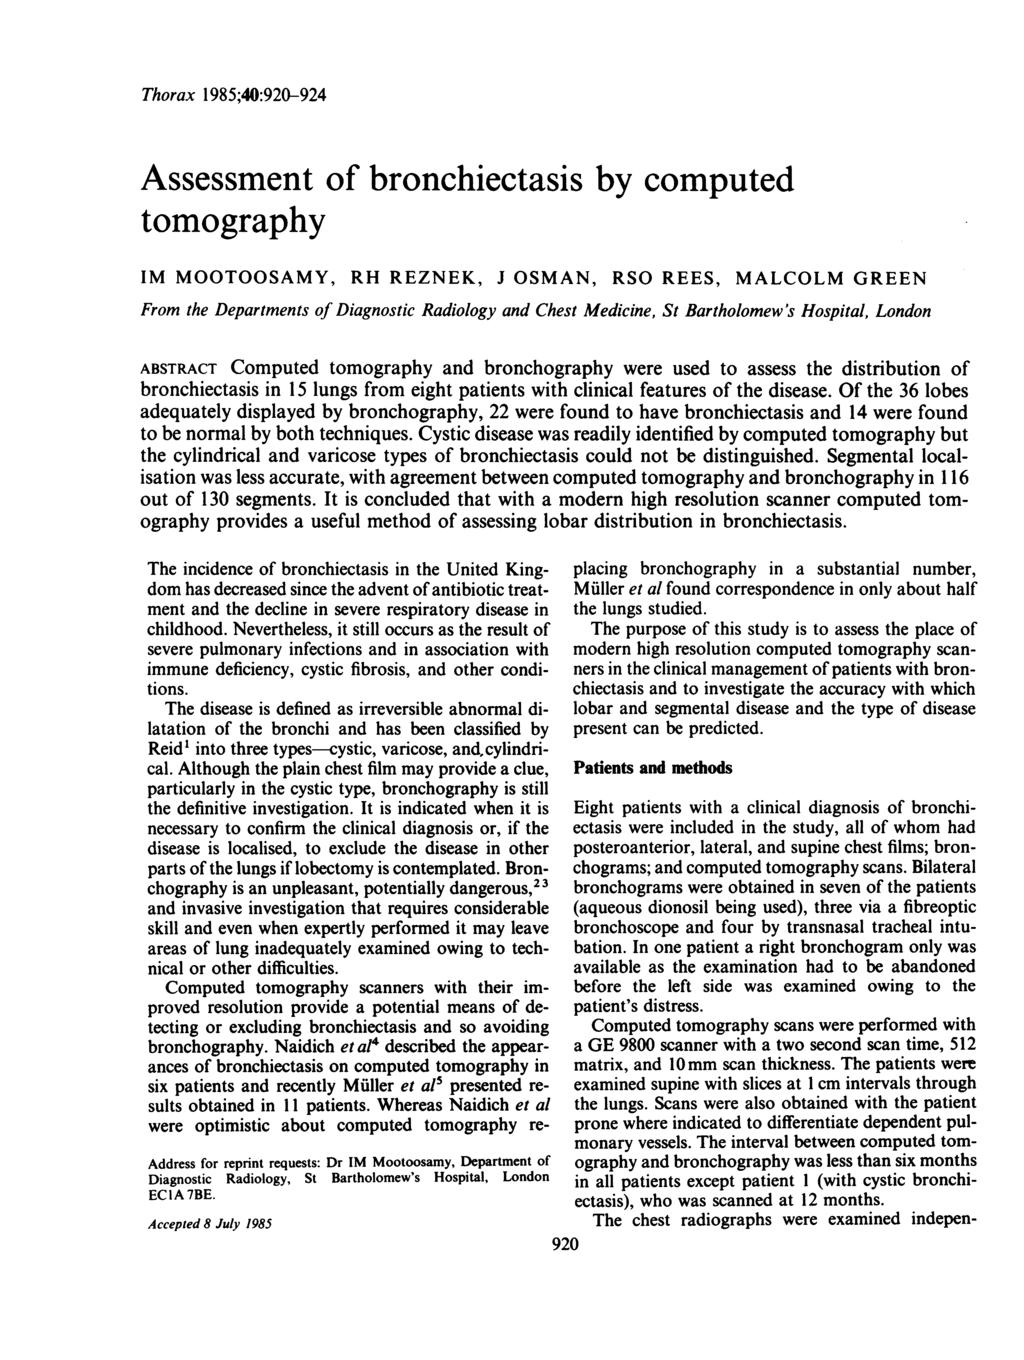 Thorax 1985;40:920-924 Assessment of bronchiectasis by computed tomography IM MOOTOOSAMY, RH REZNEK, J OSMAN, RSO REES, MALCOLM GREEN From the Departments of Diagnostic Radiology and Chest Medicine,